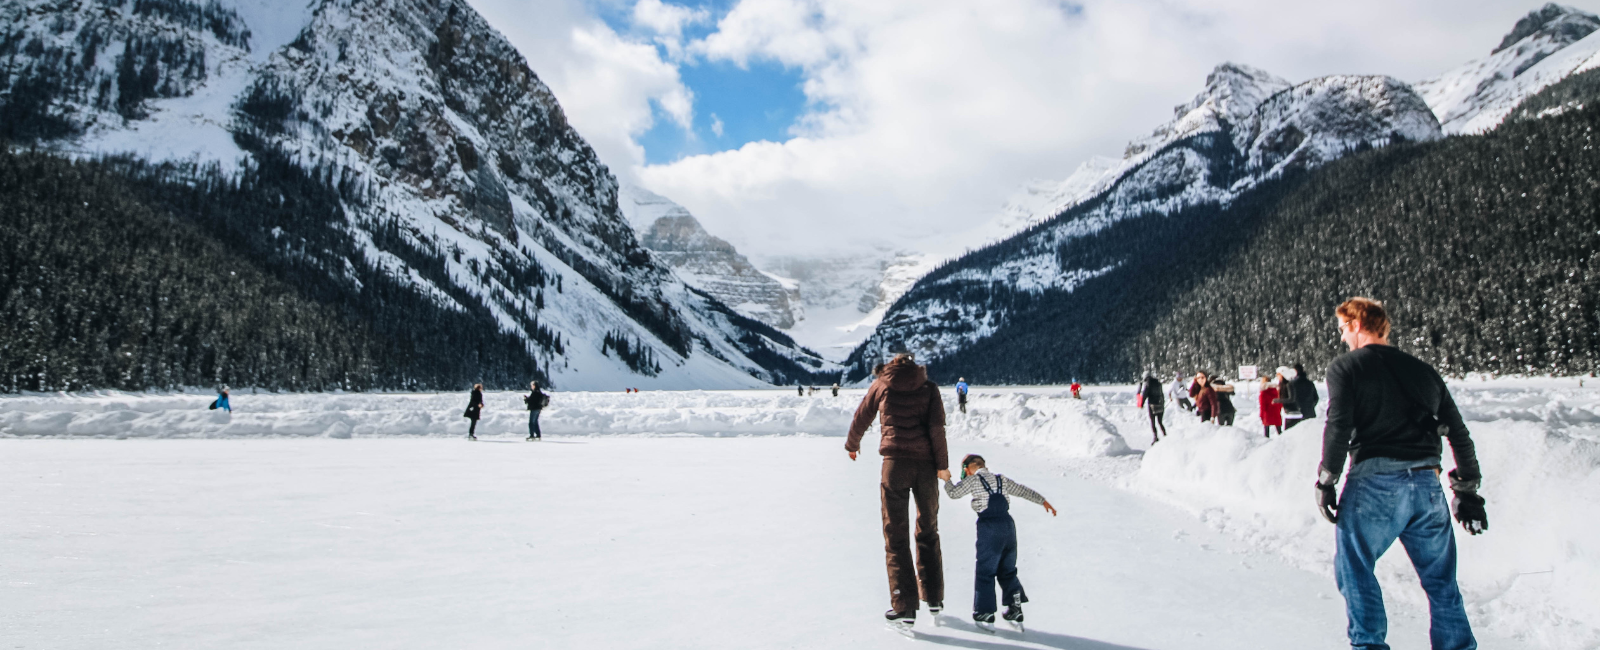 People ice skating in the Canadian Rockies, Canada